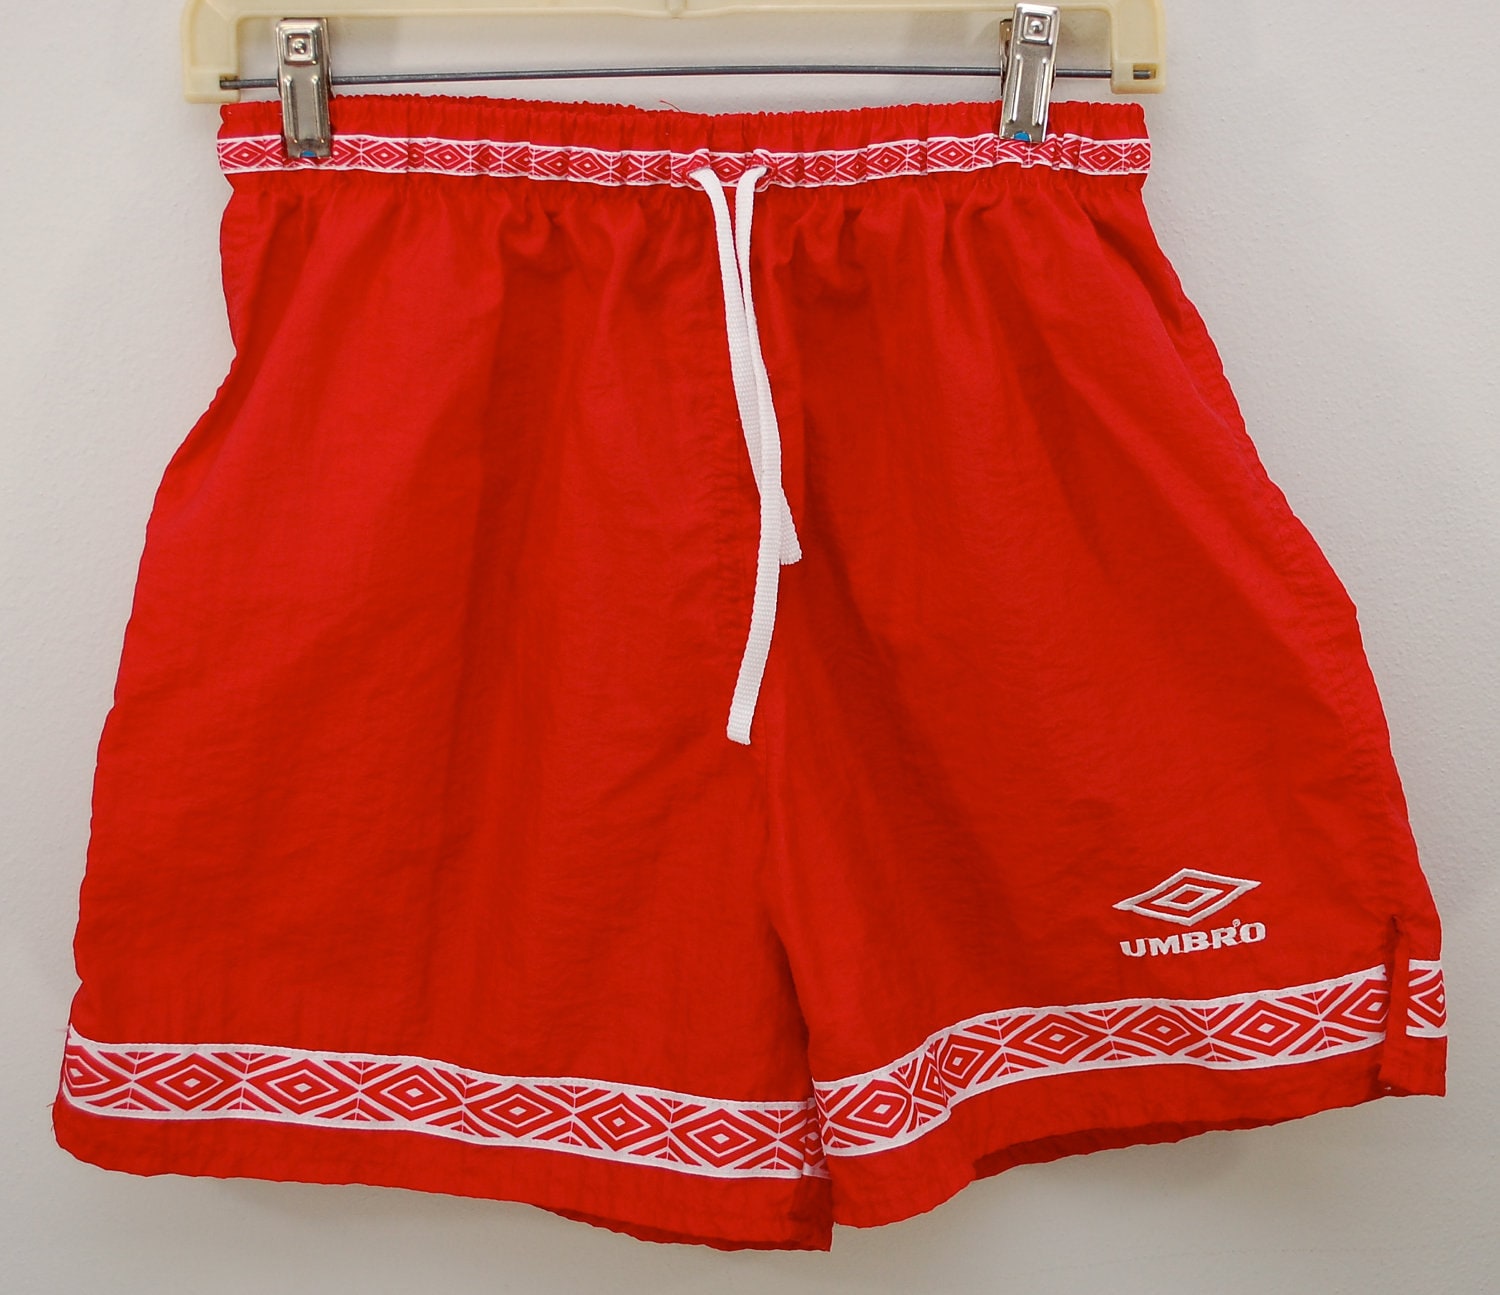 Vintage UMBRO Nylon Soccer Shorts Made in USA by ilovevintagestuff